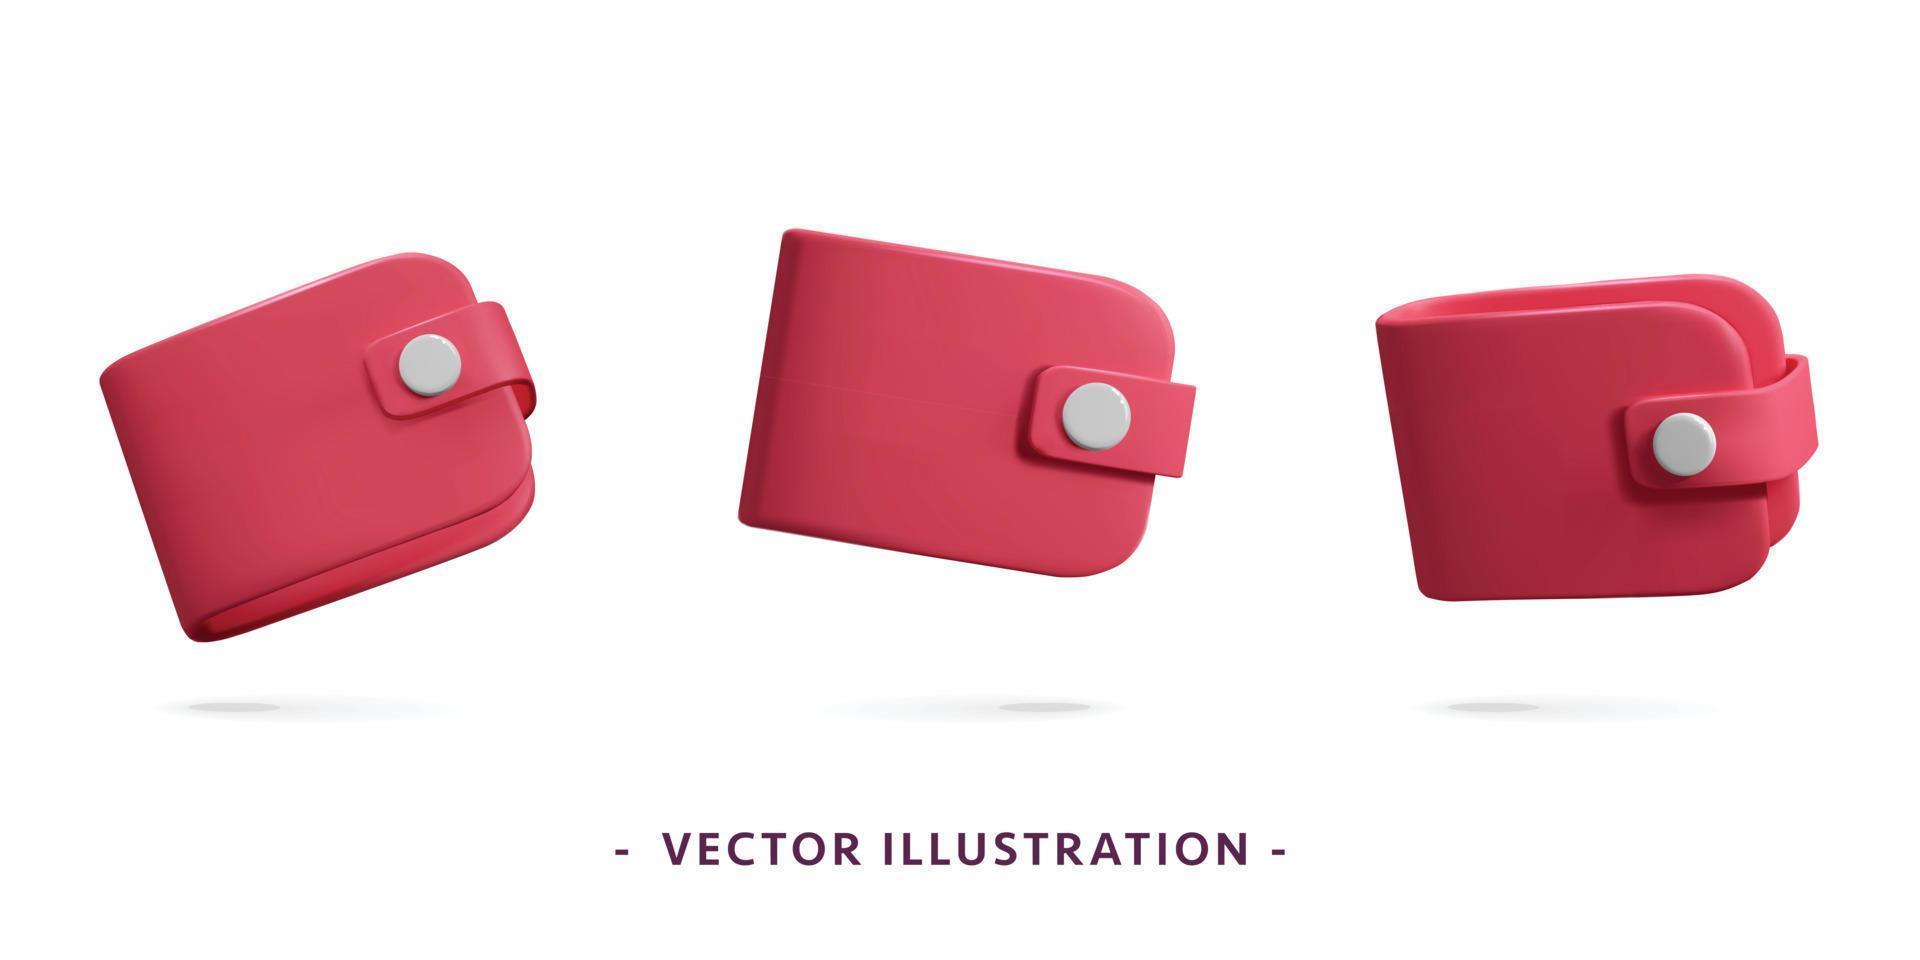 Collection of 3d vector red empty money wallets in different points of view web mockup element for commercial and banking app design